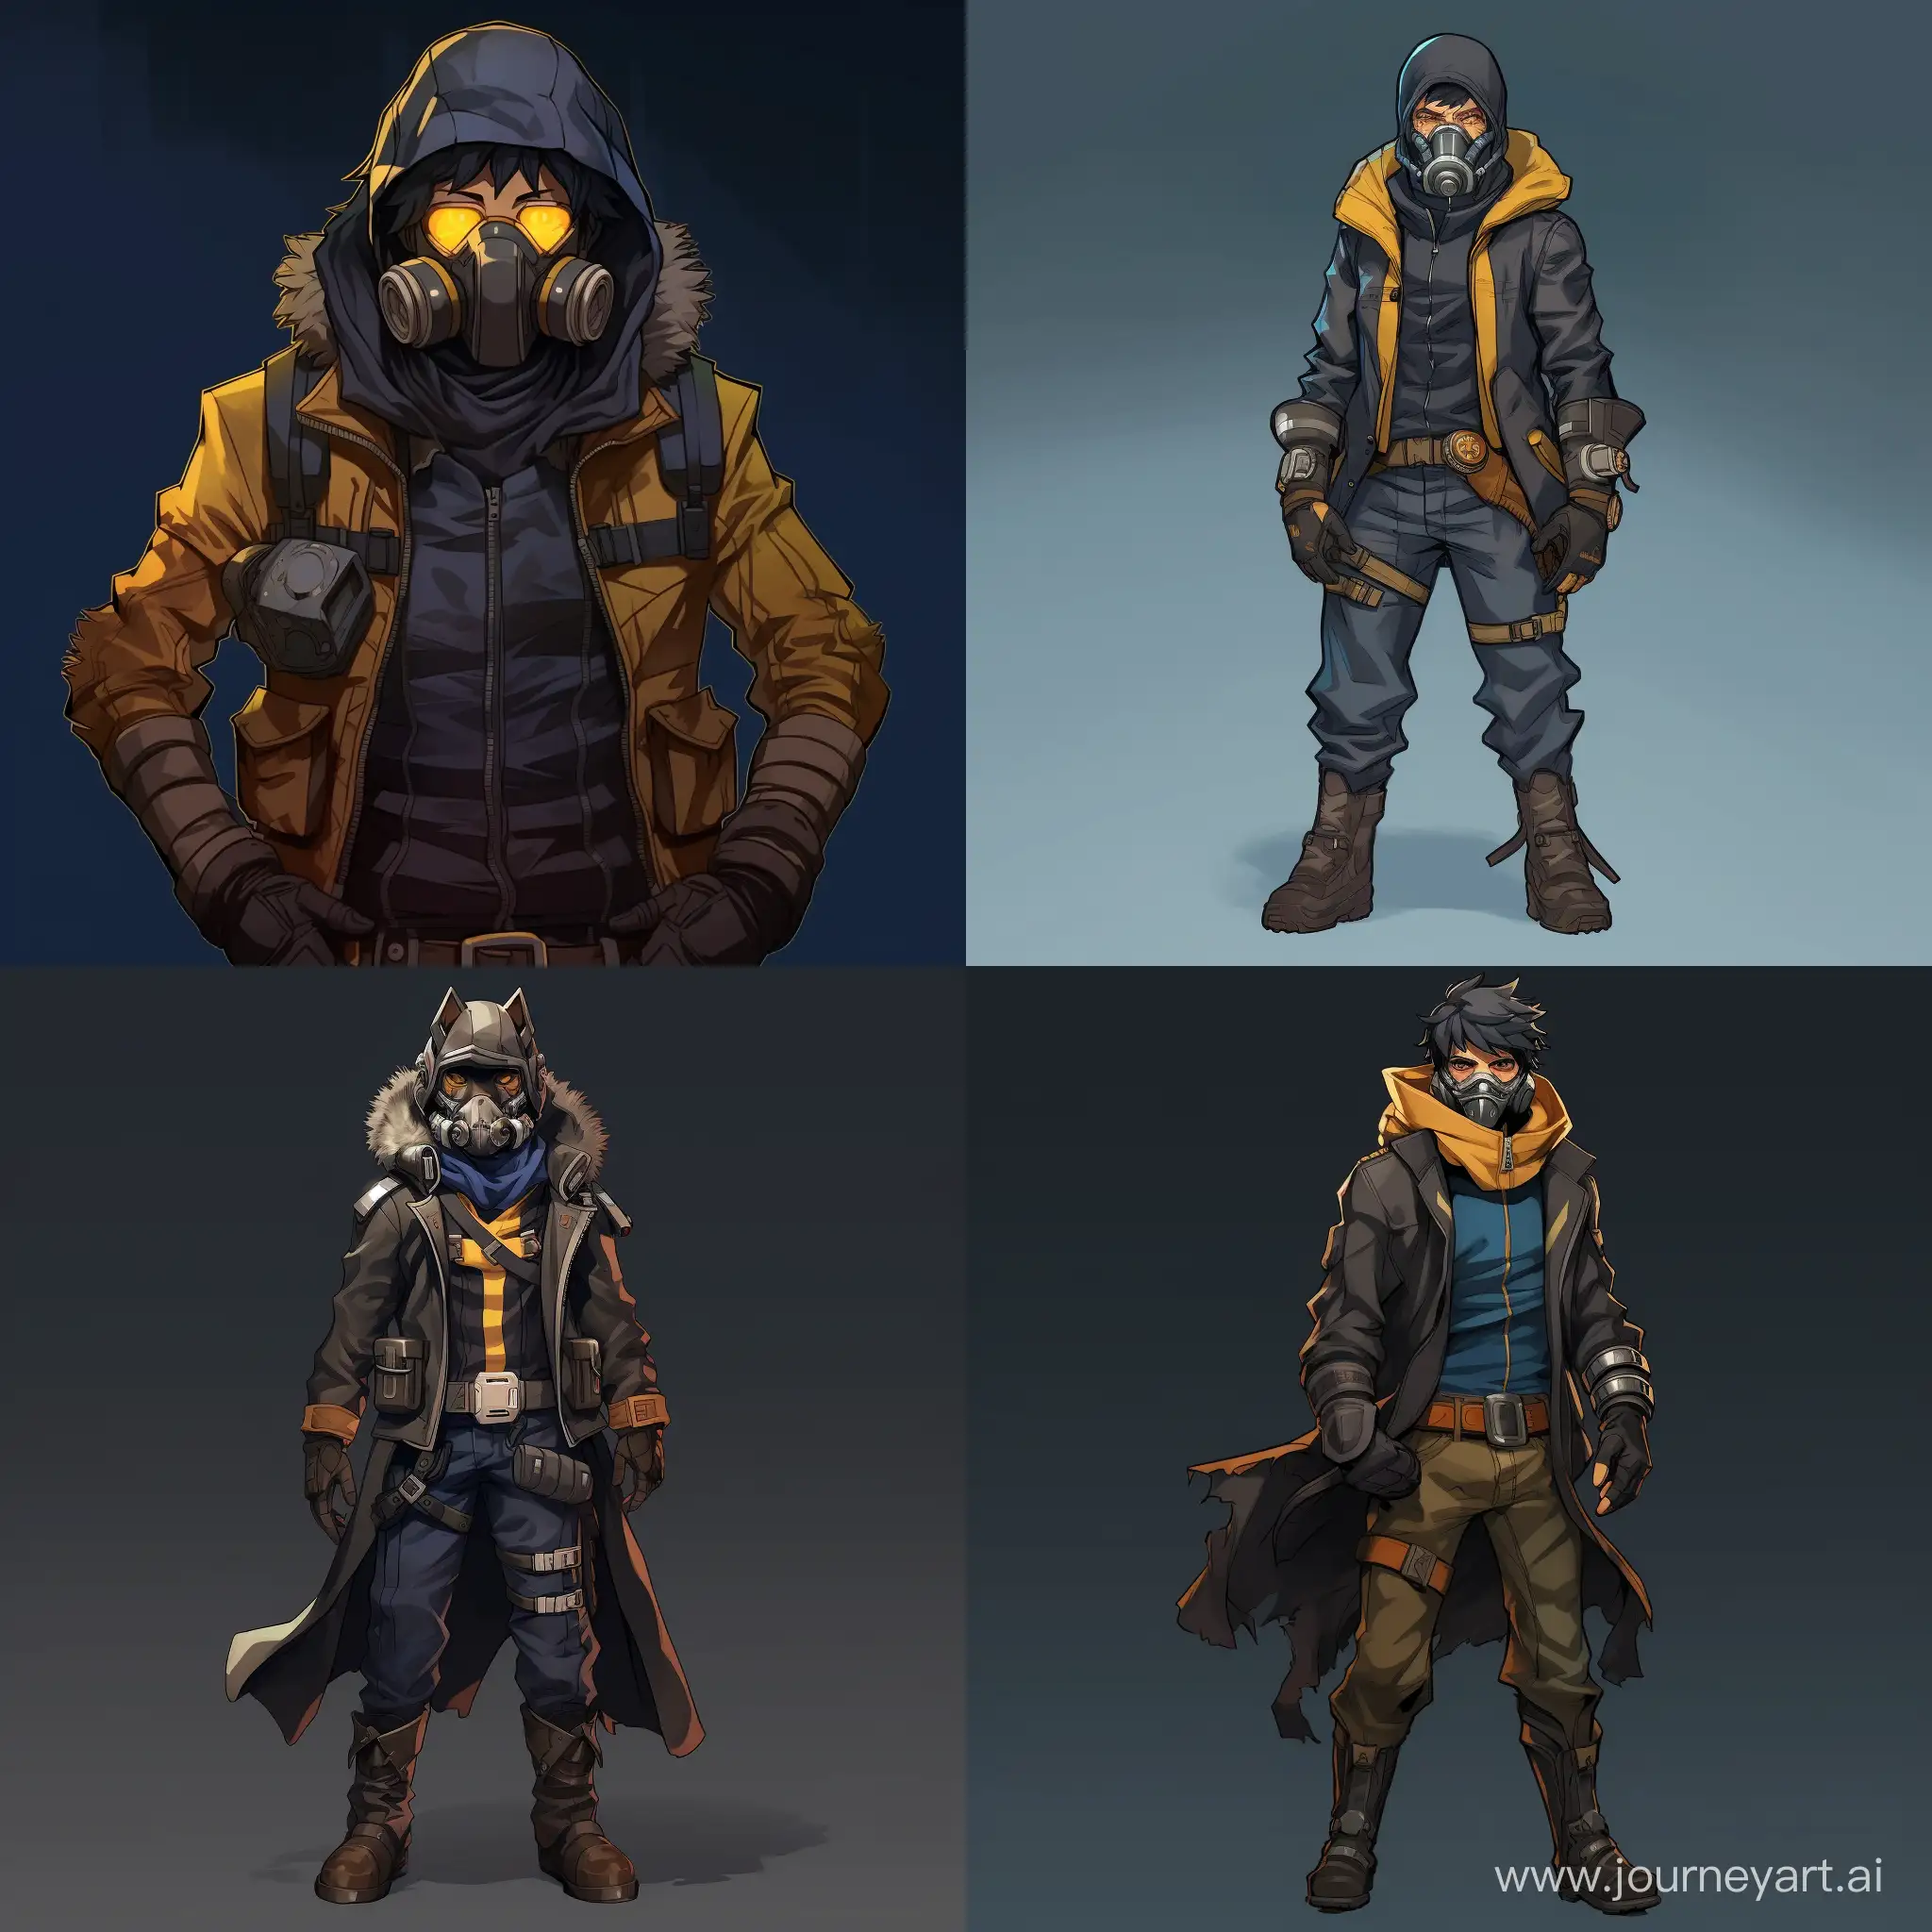 In the style of anime, in full growth. Engineer-scientist with a strong physique. He wears a gas mask with double-filtered, amber-colored lenses. Dressed in a dark blue warm jacket with a hood with fur trim and dark blue jeans. He also wears gray gloves and black combat boots.